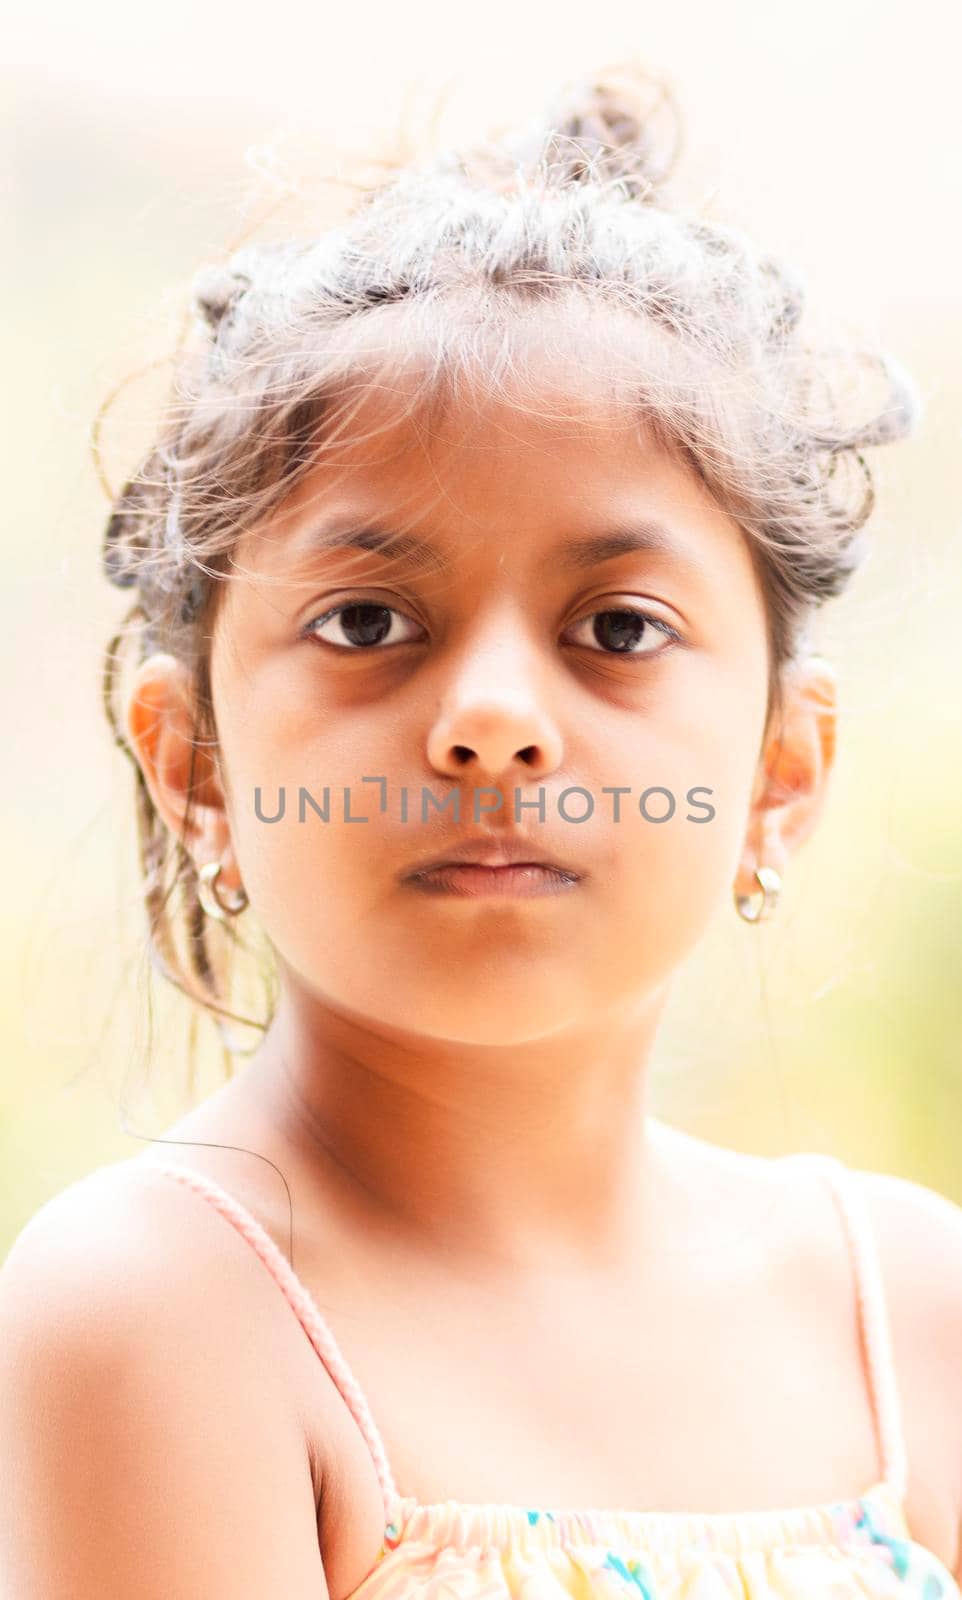 Portrait of cute little girl showing her beautiful face by eagg13